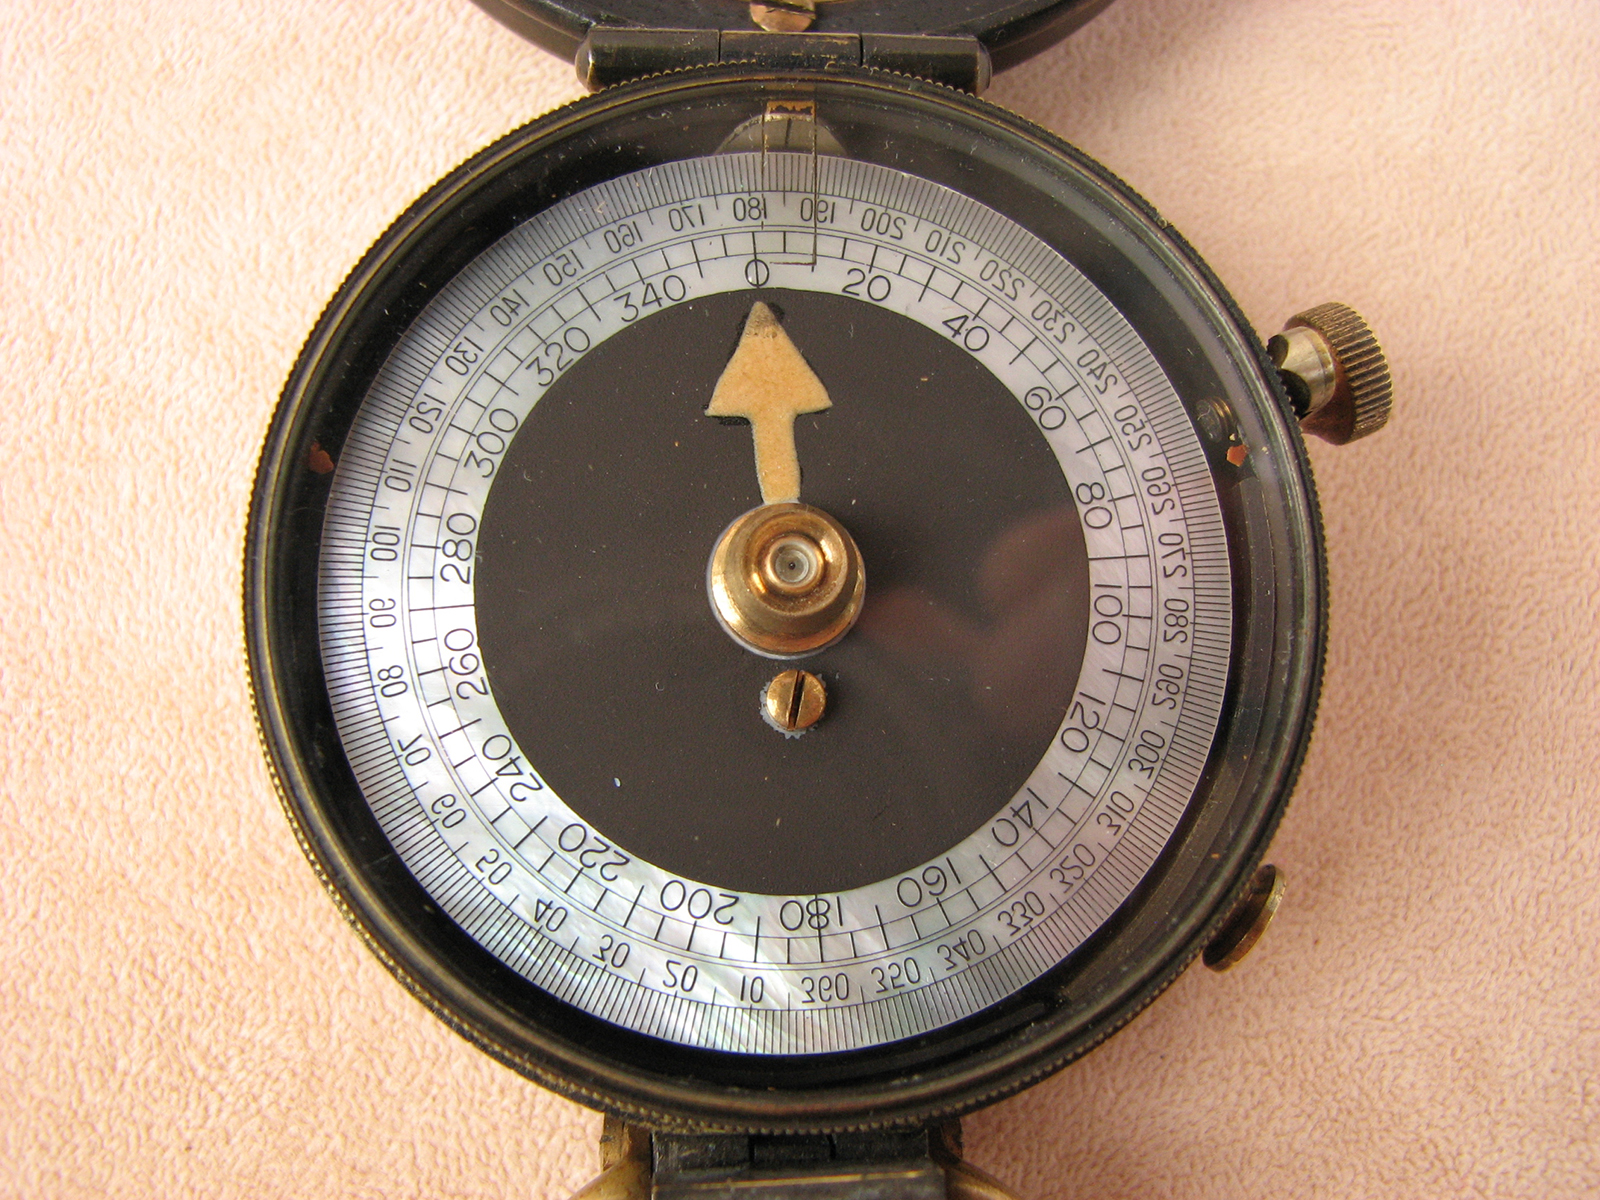 Bausch & Lomb WW1 Verners MK VIII prismatic marching compass